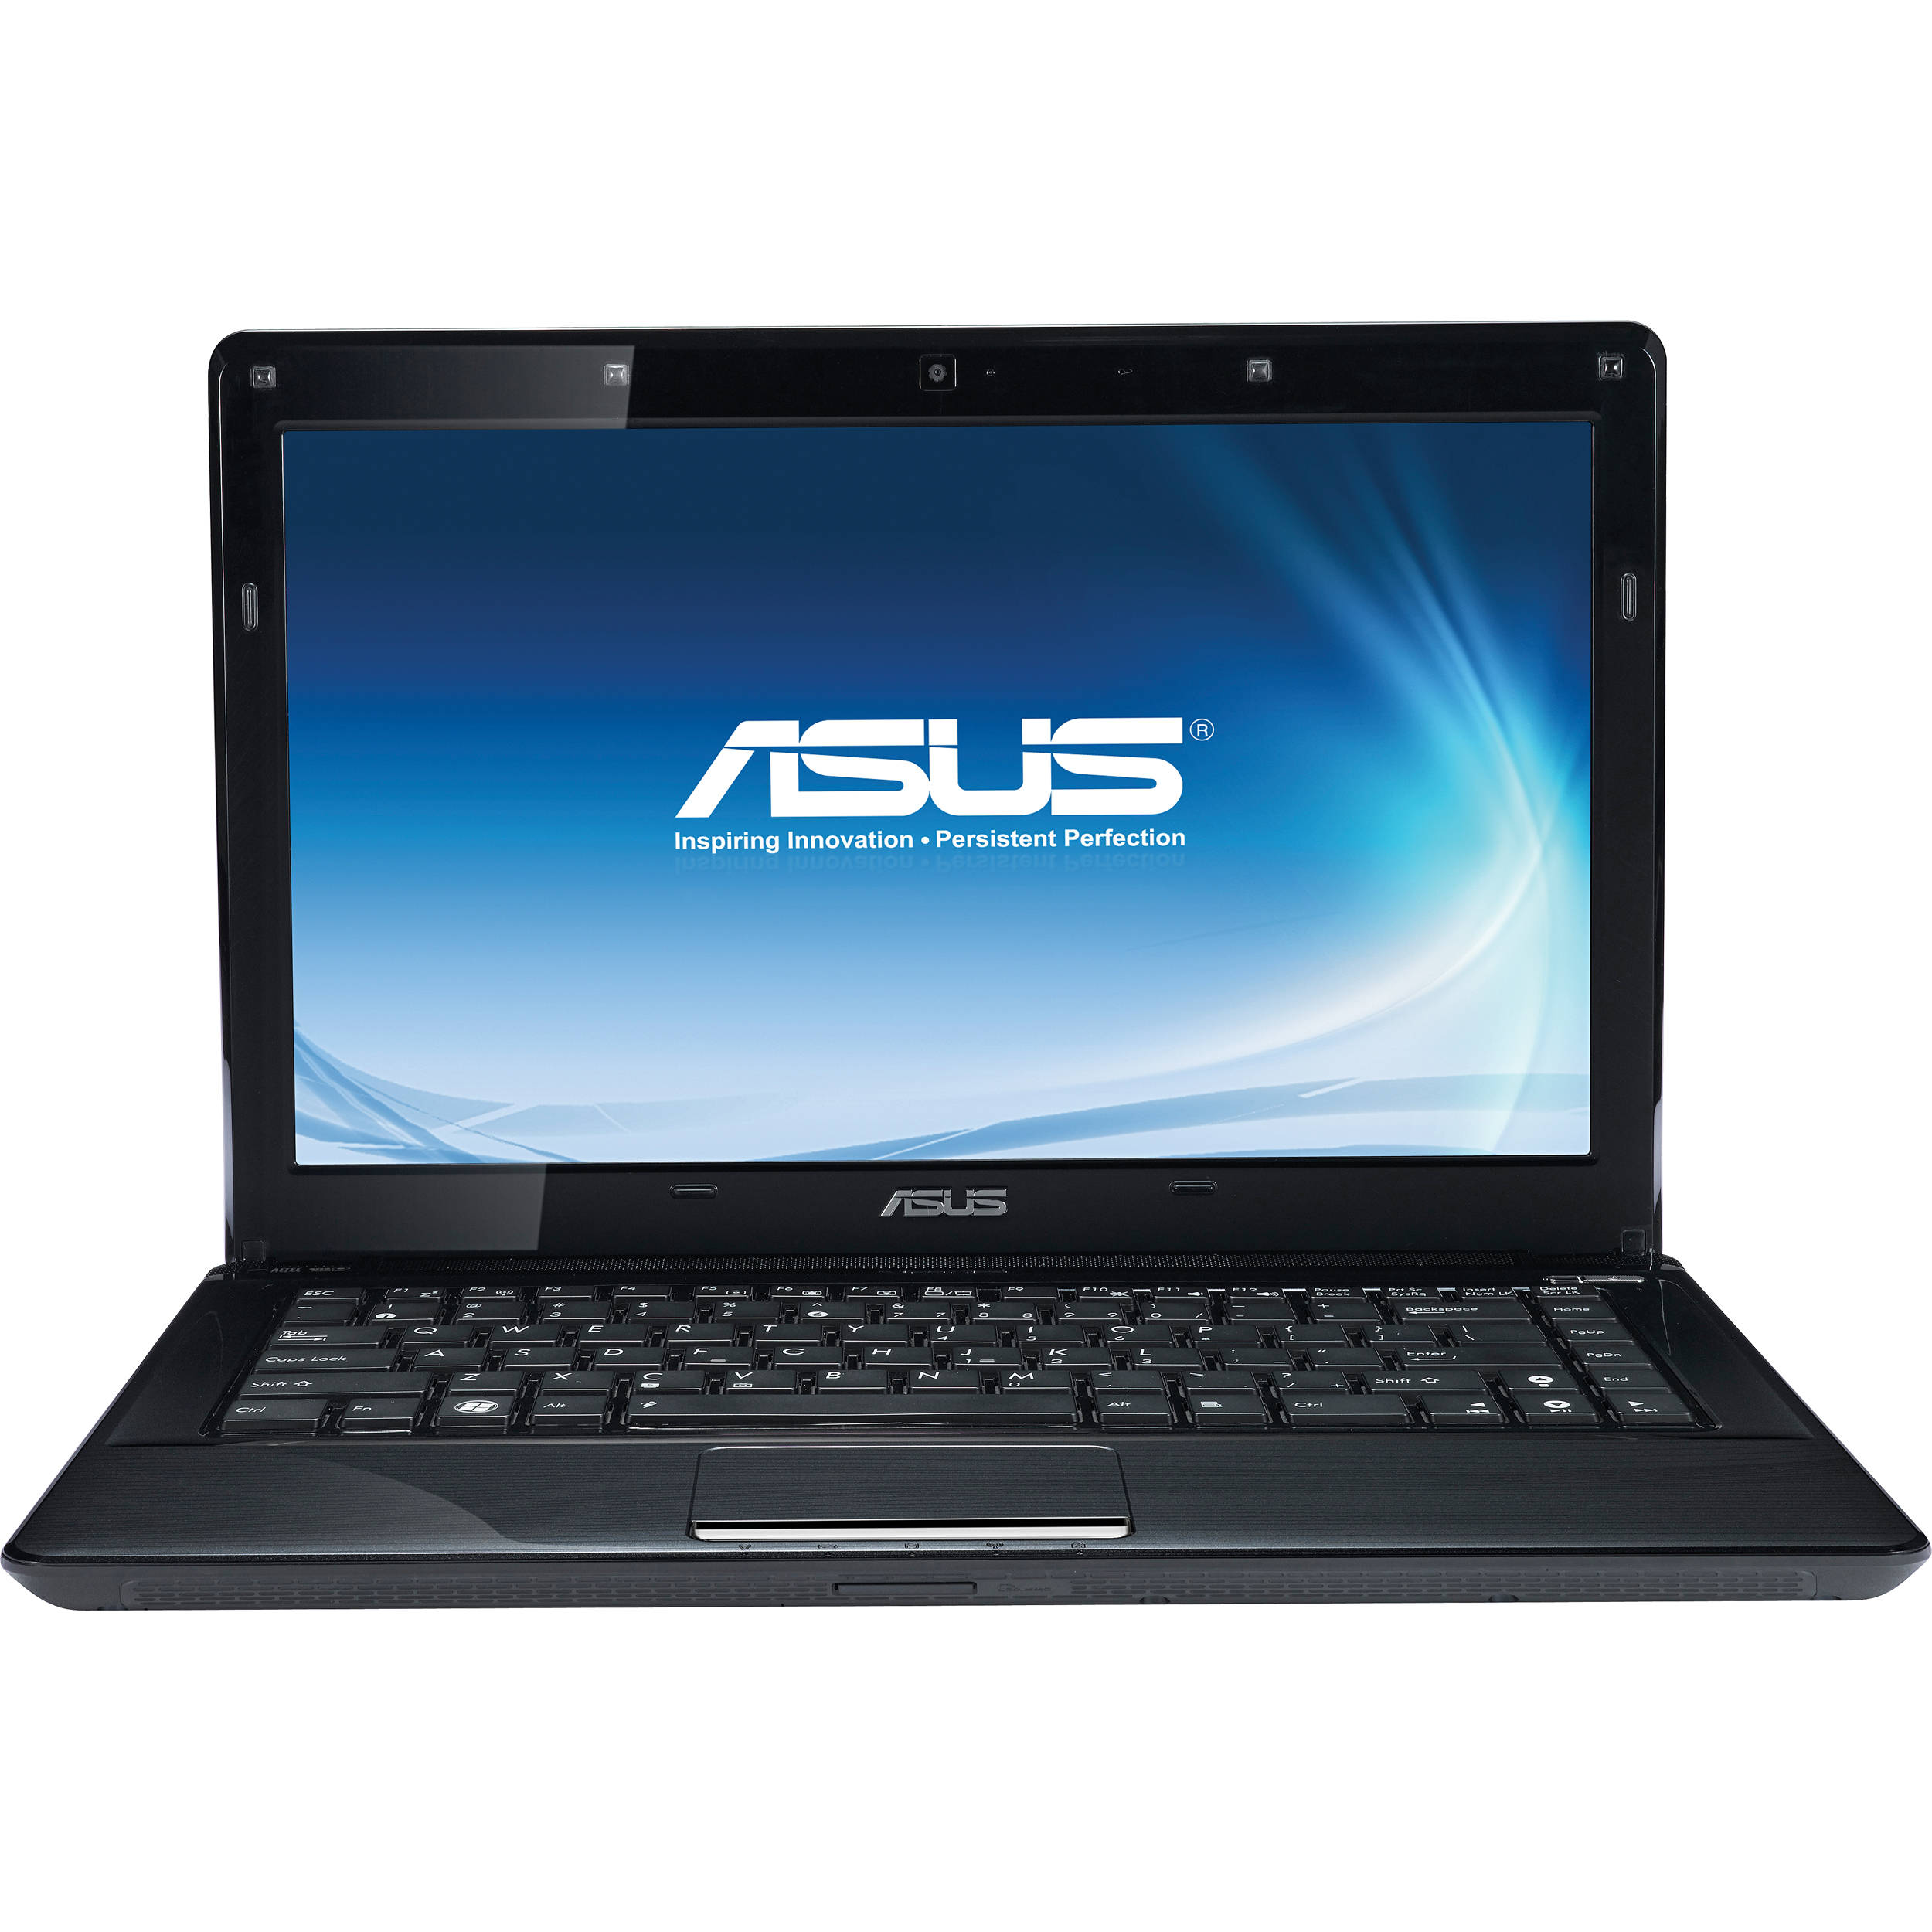 Asus K42F Notebook